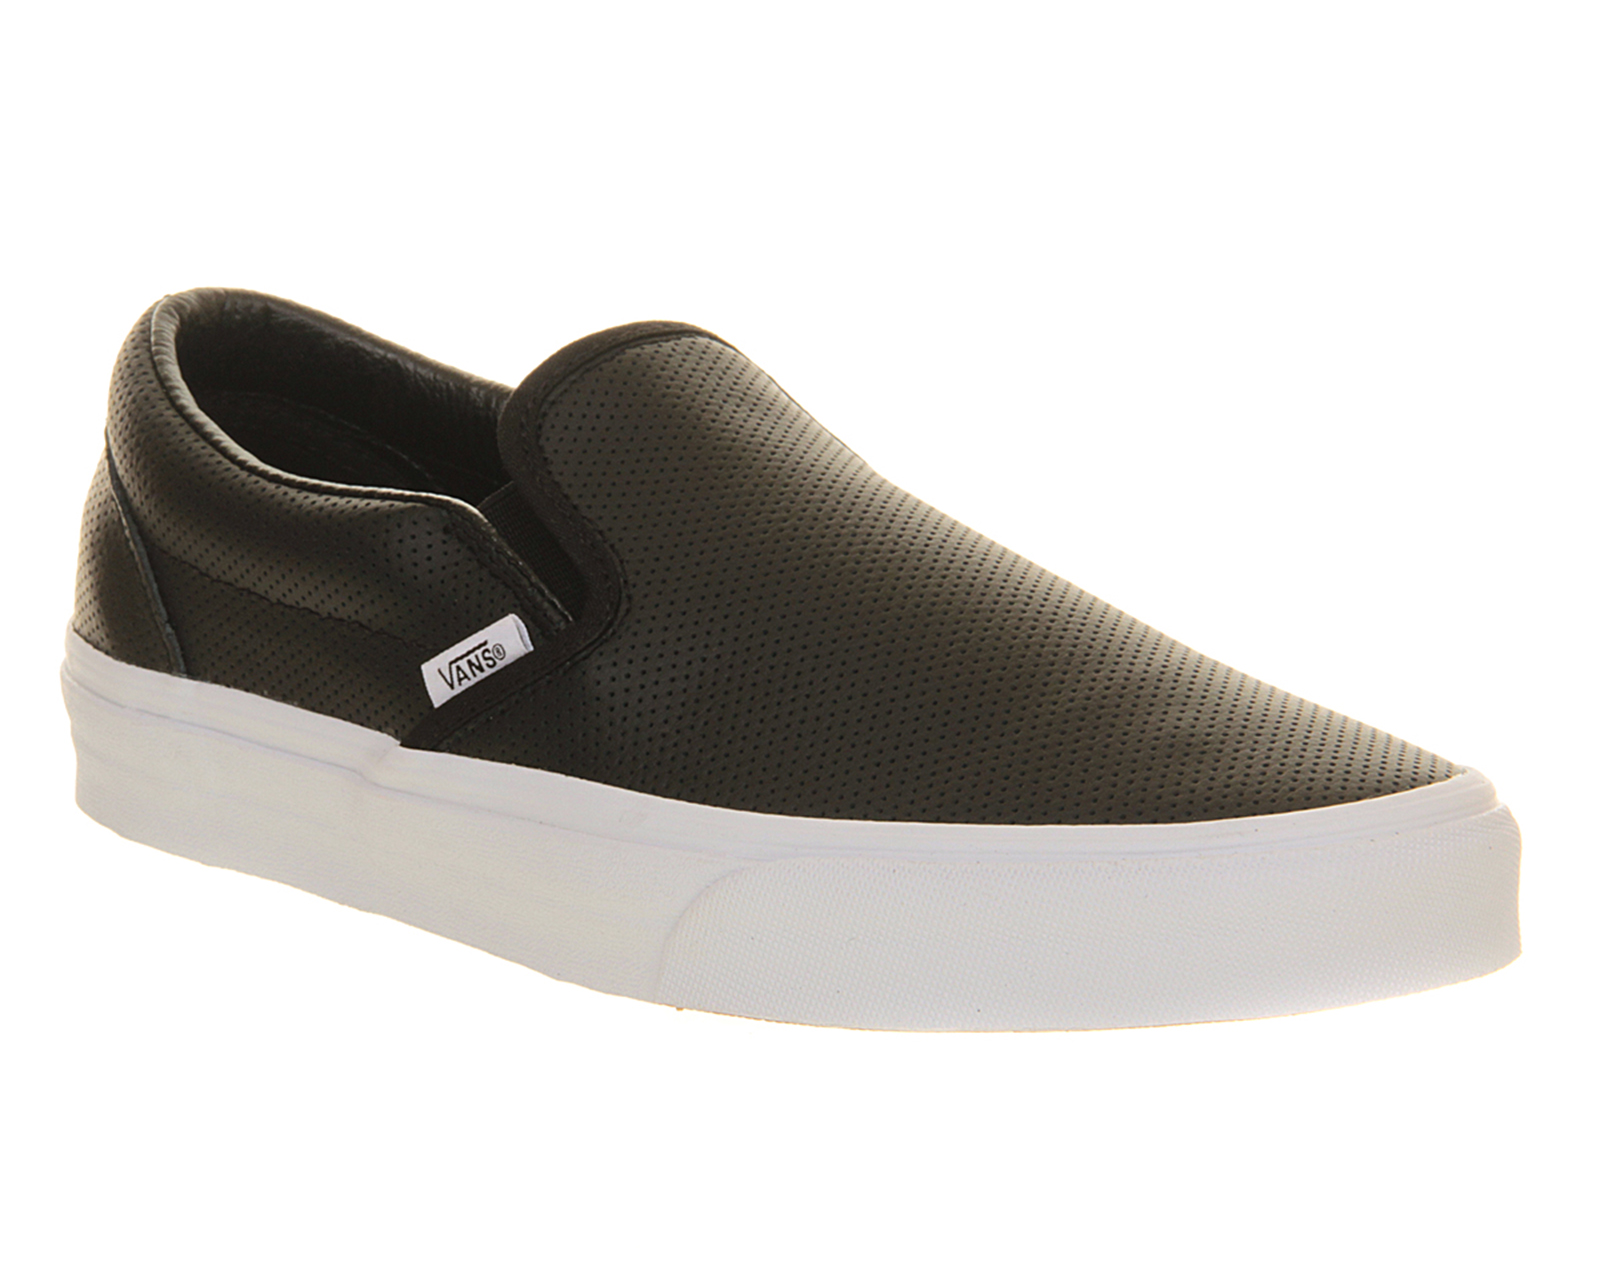 VansClassic Slip On ShoesBlack Perforated Leather